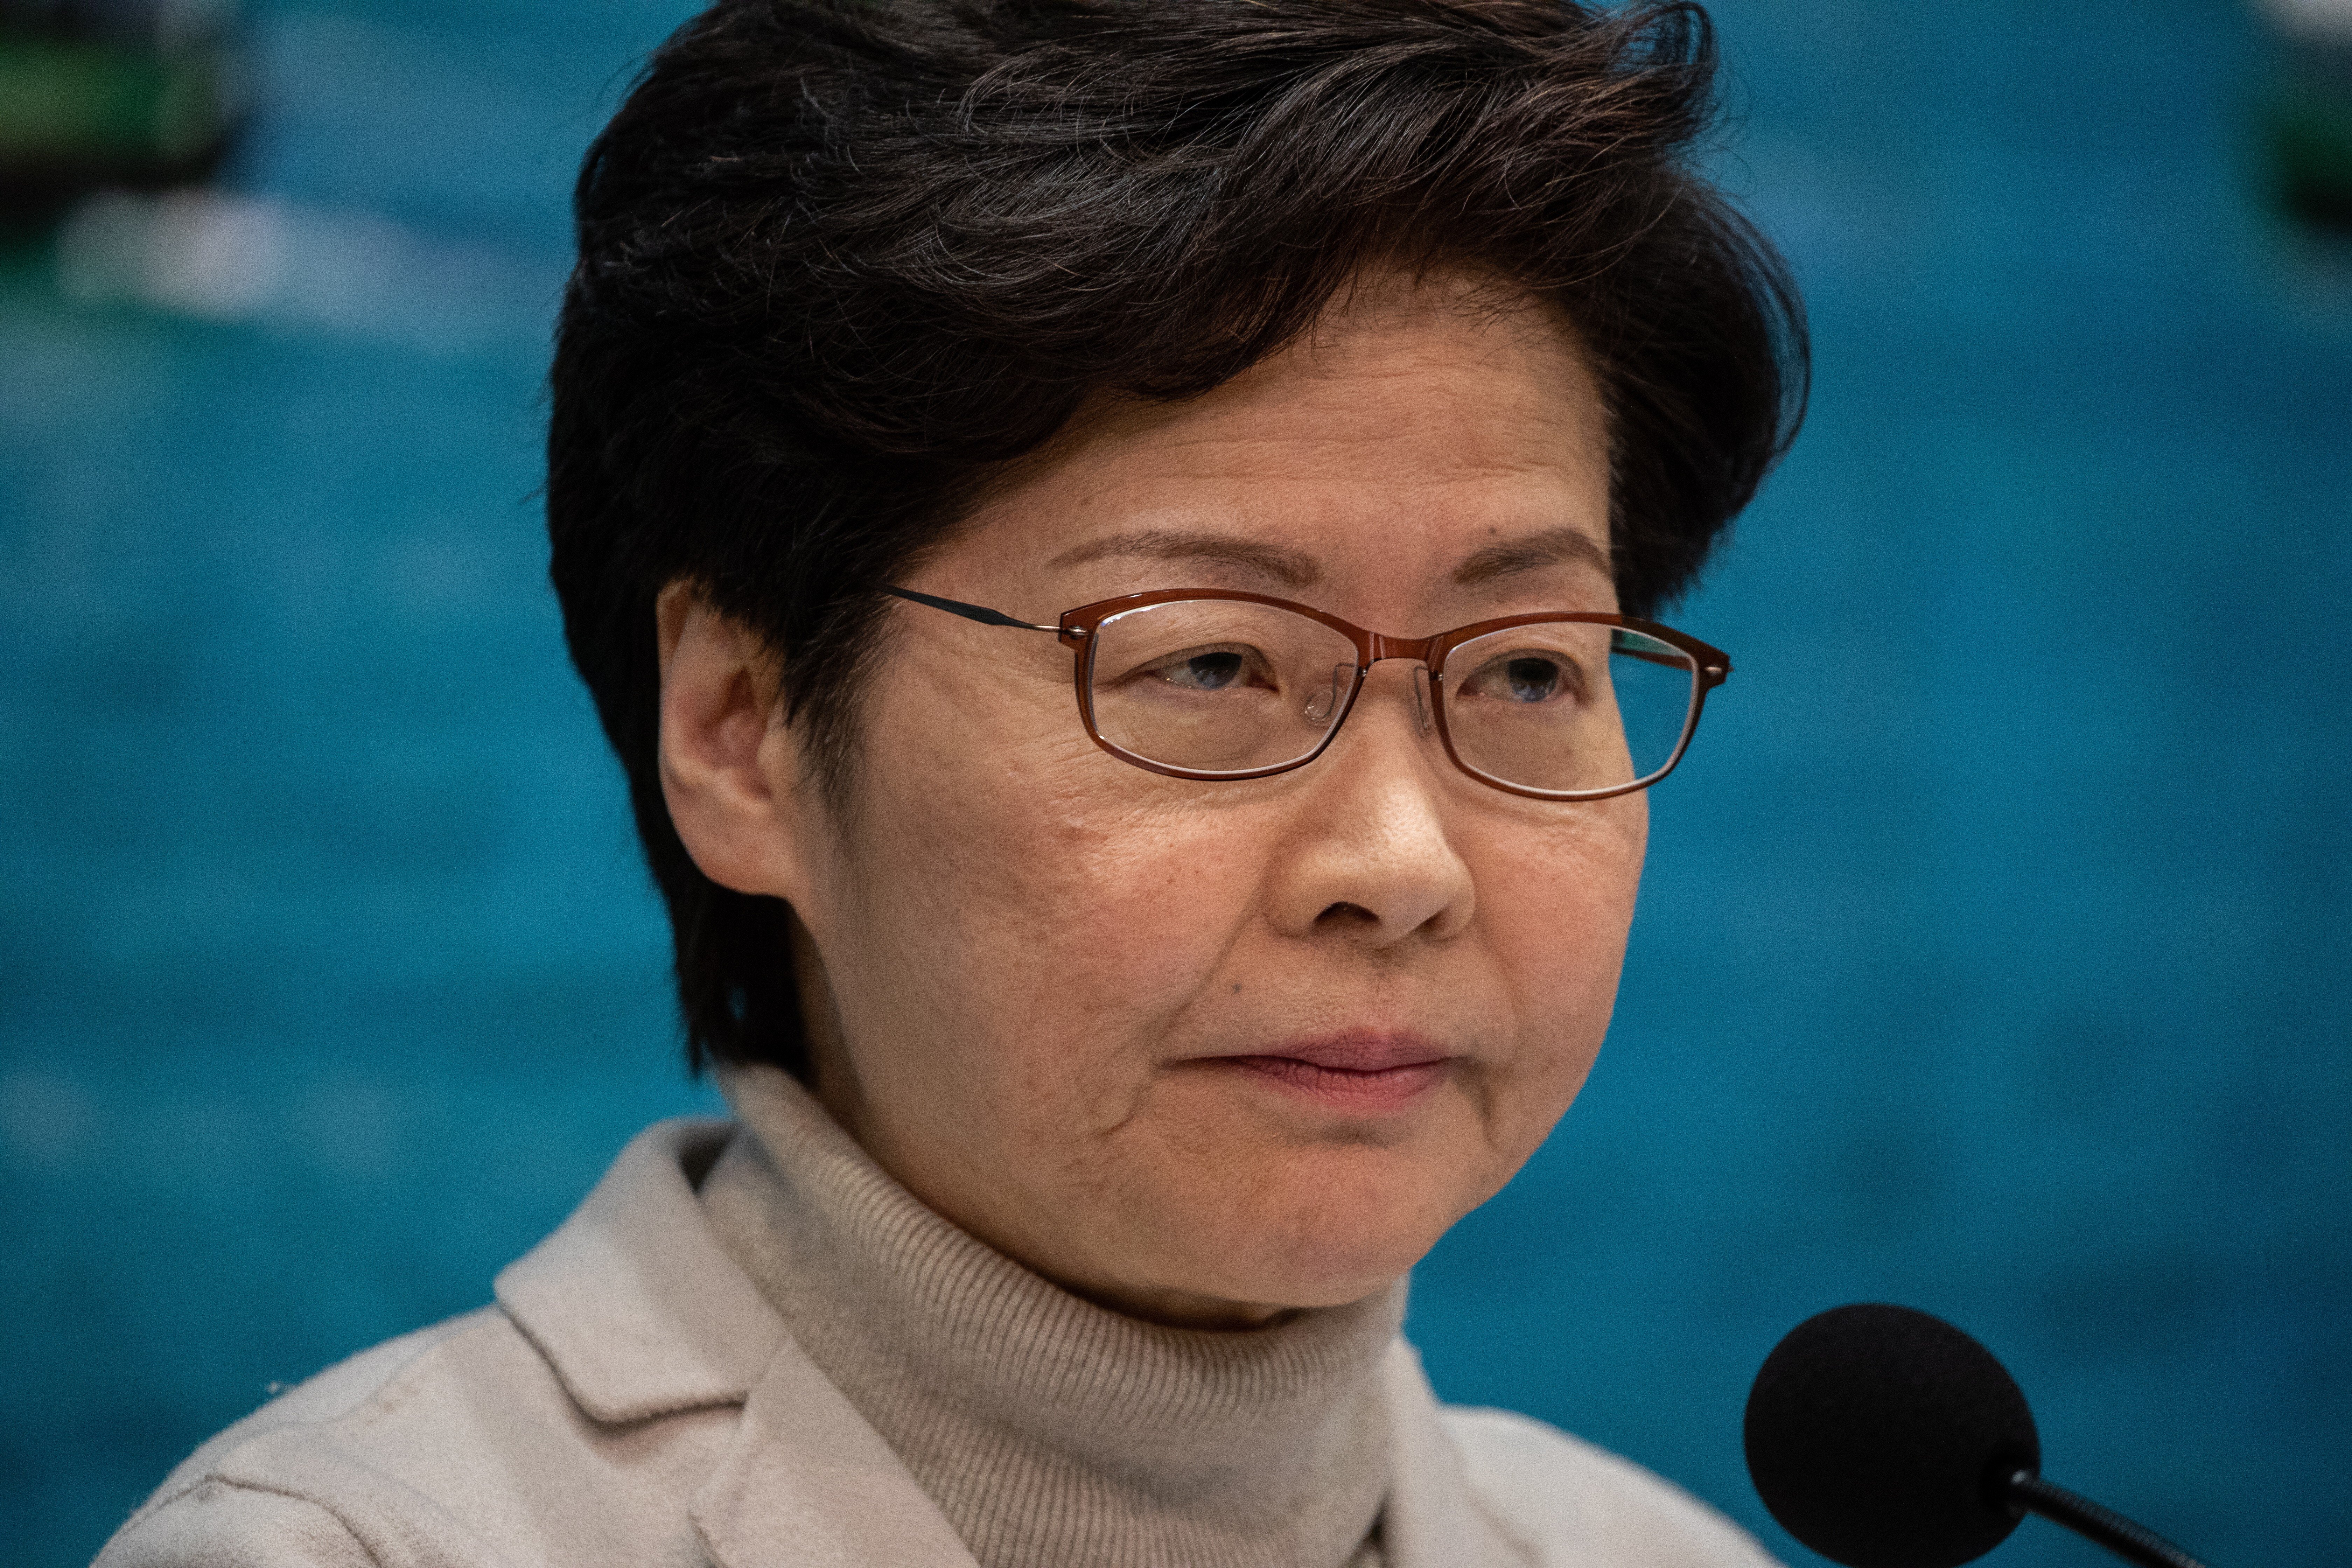 Hong Kong Chief Executive Carrie Lam has declared she will give up her US visa which is due to expire in 2026. Photo: EPA-EFE